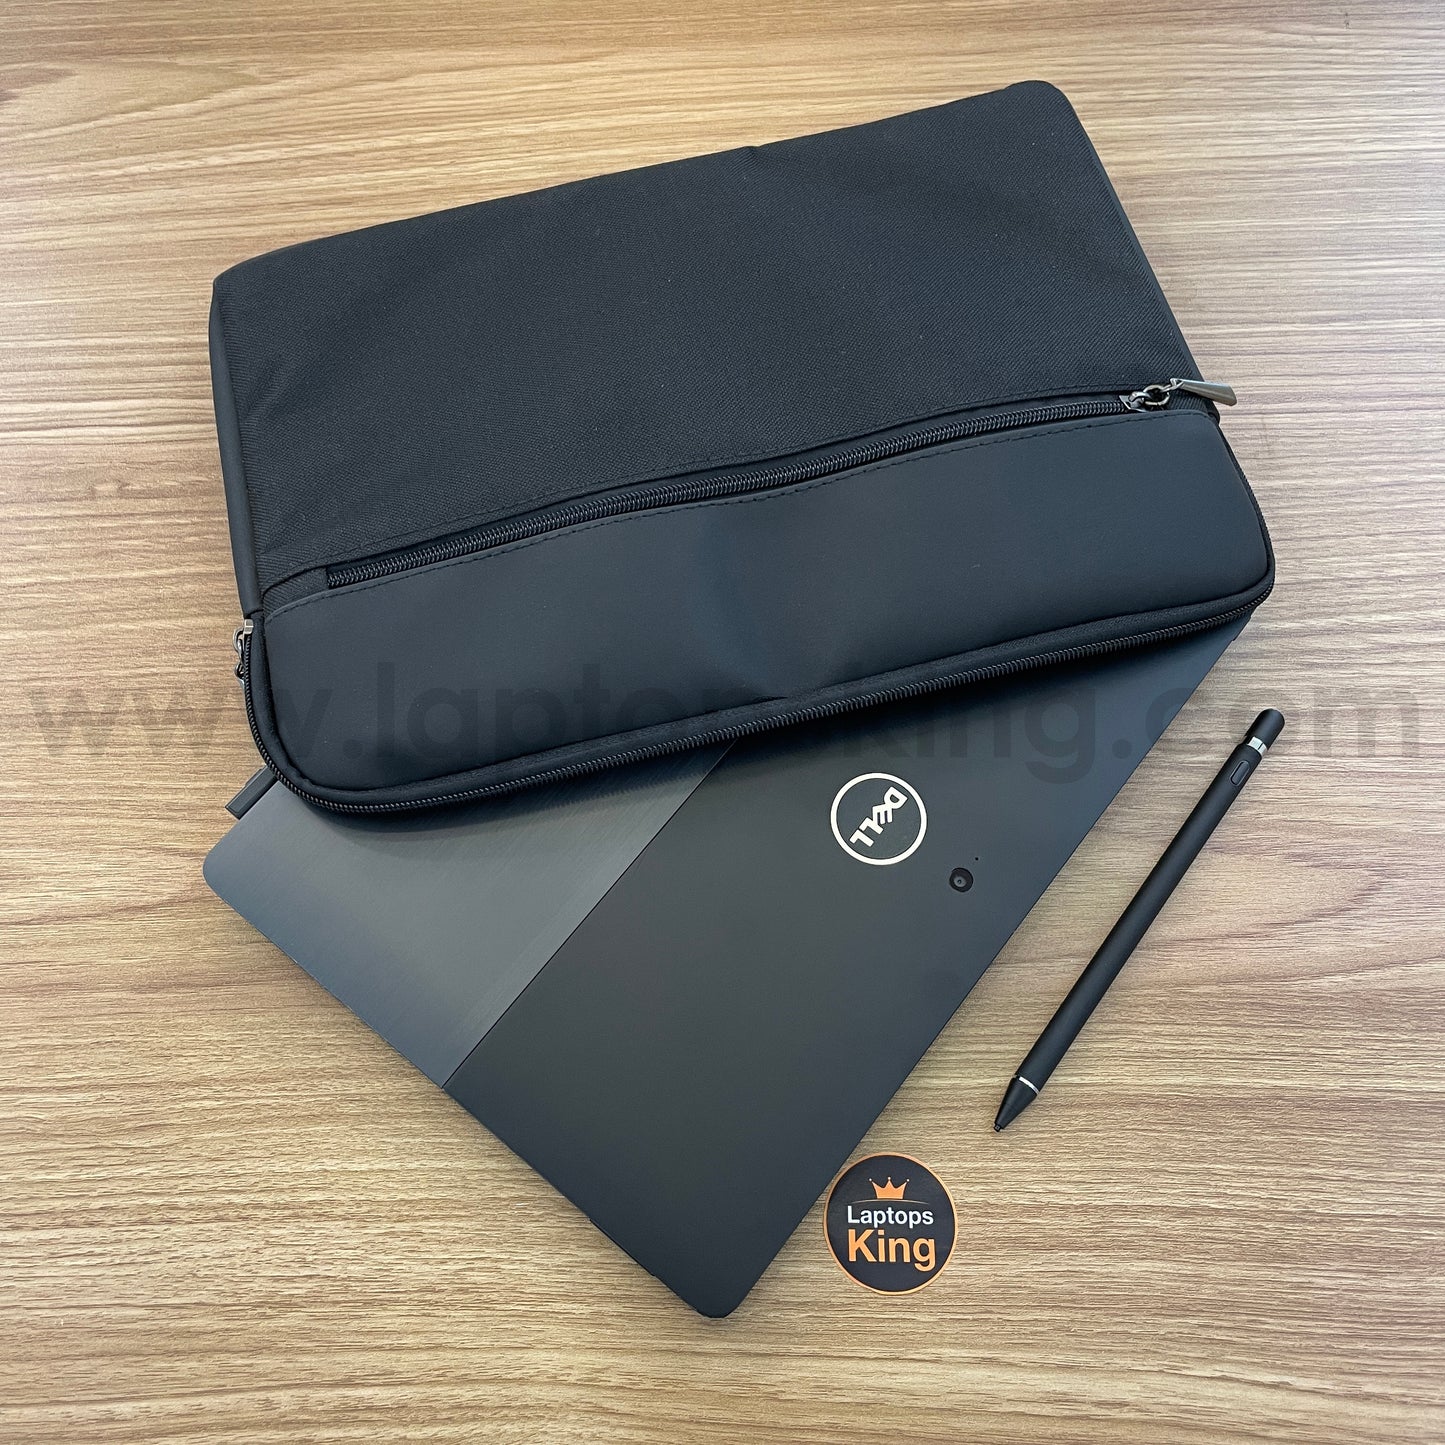 Dell Latitude 5285 2in1 Core i5 Detachable Touch Laptop (Used Very Clean)